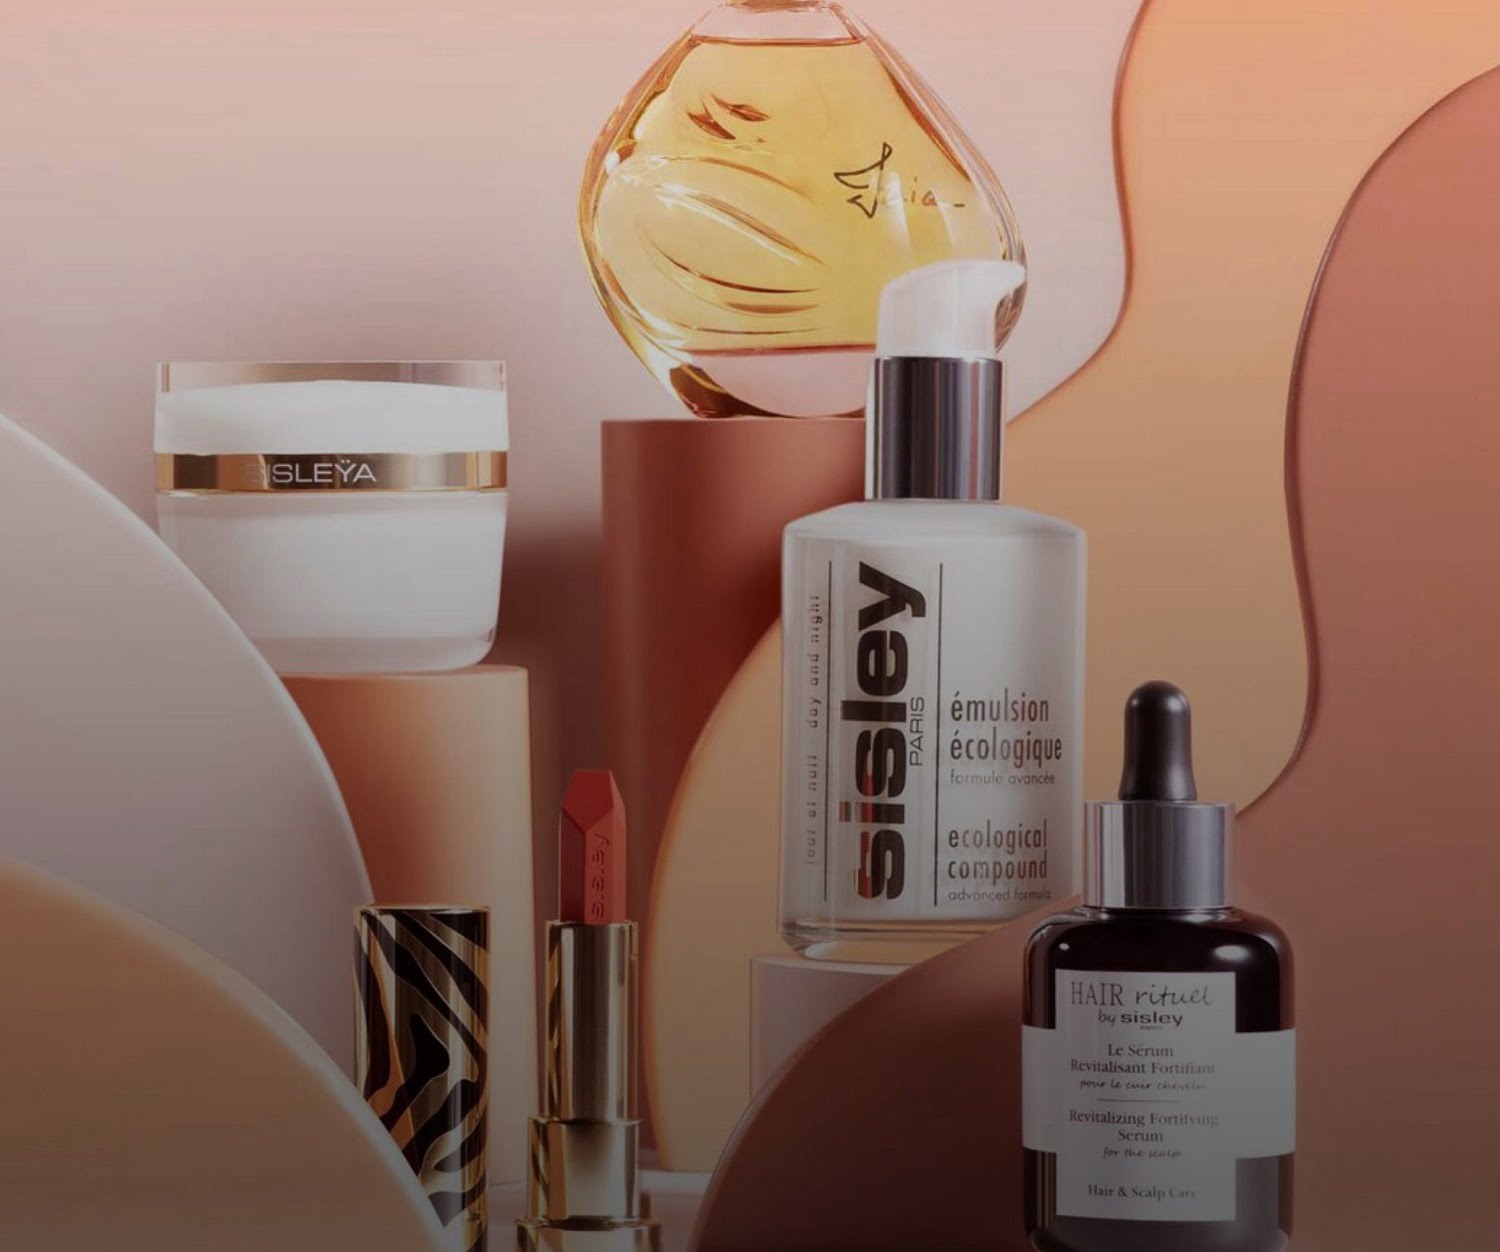 15% off any Sisley and Hair Rituel by Sisley purchase